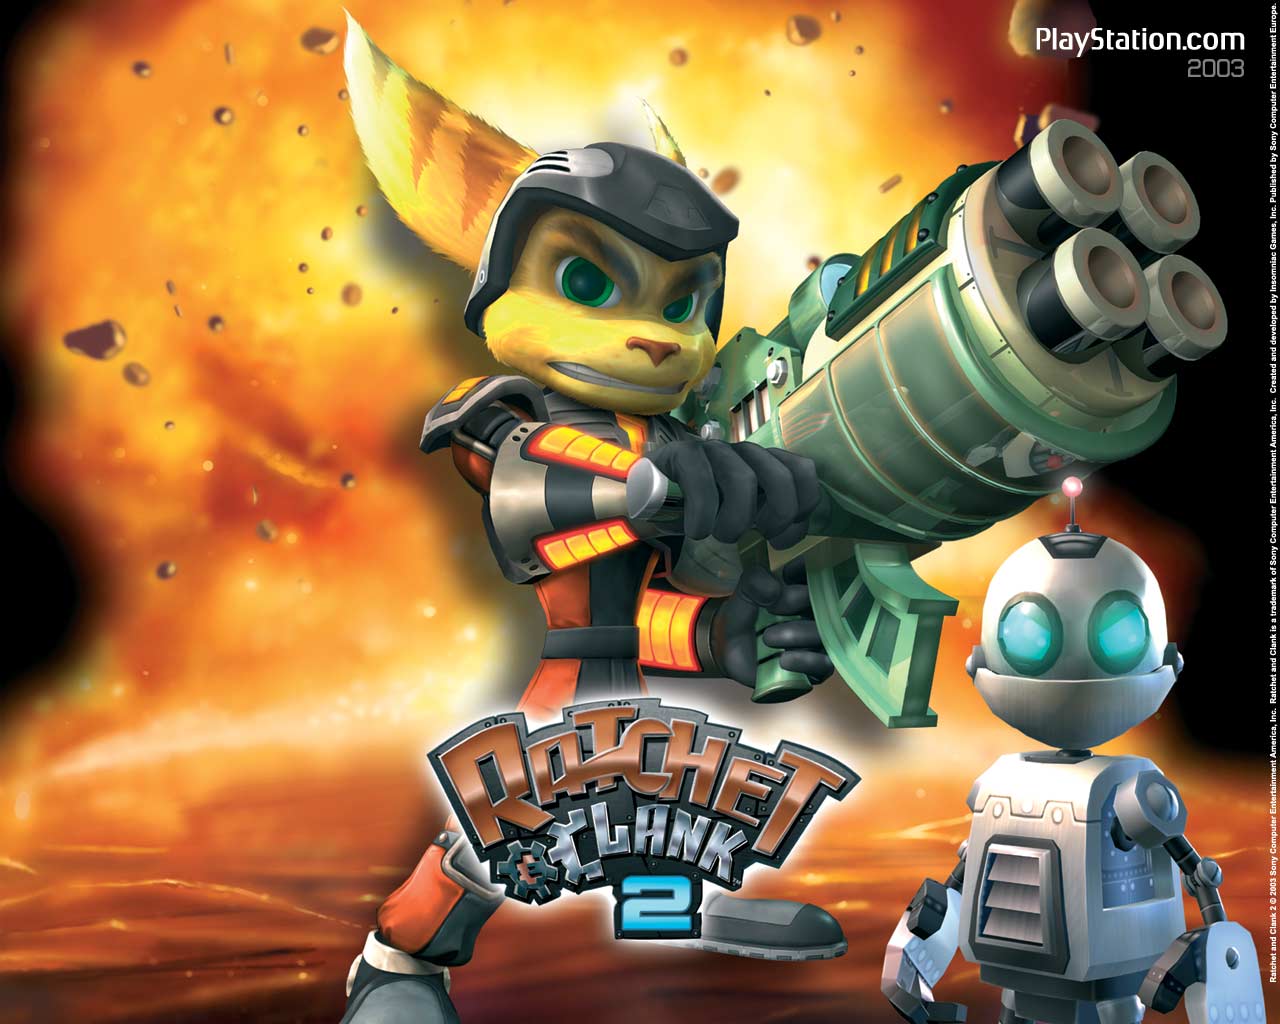 Ratchet And Clank (id: 57496)